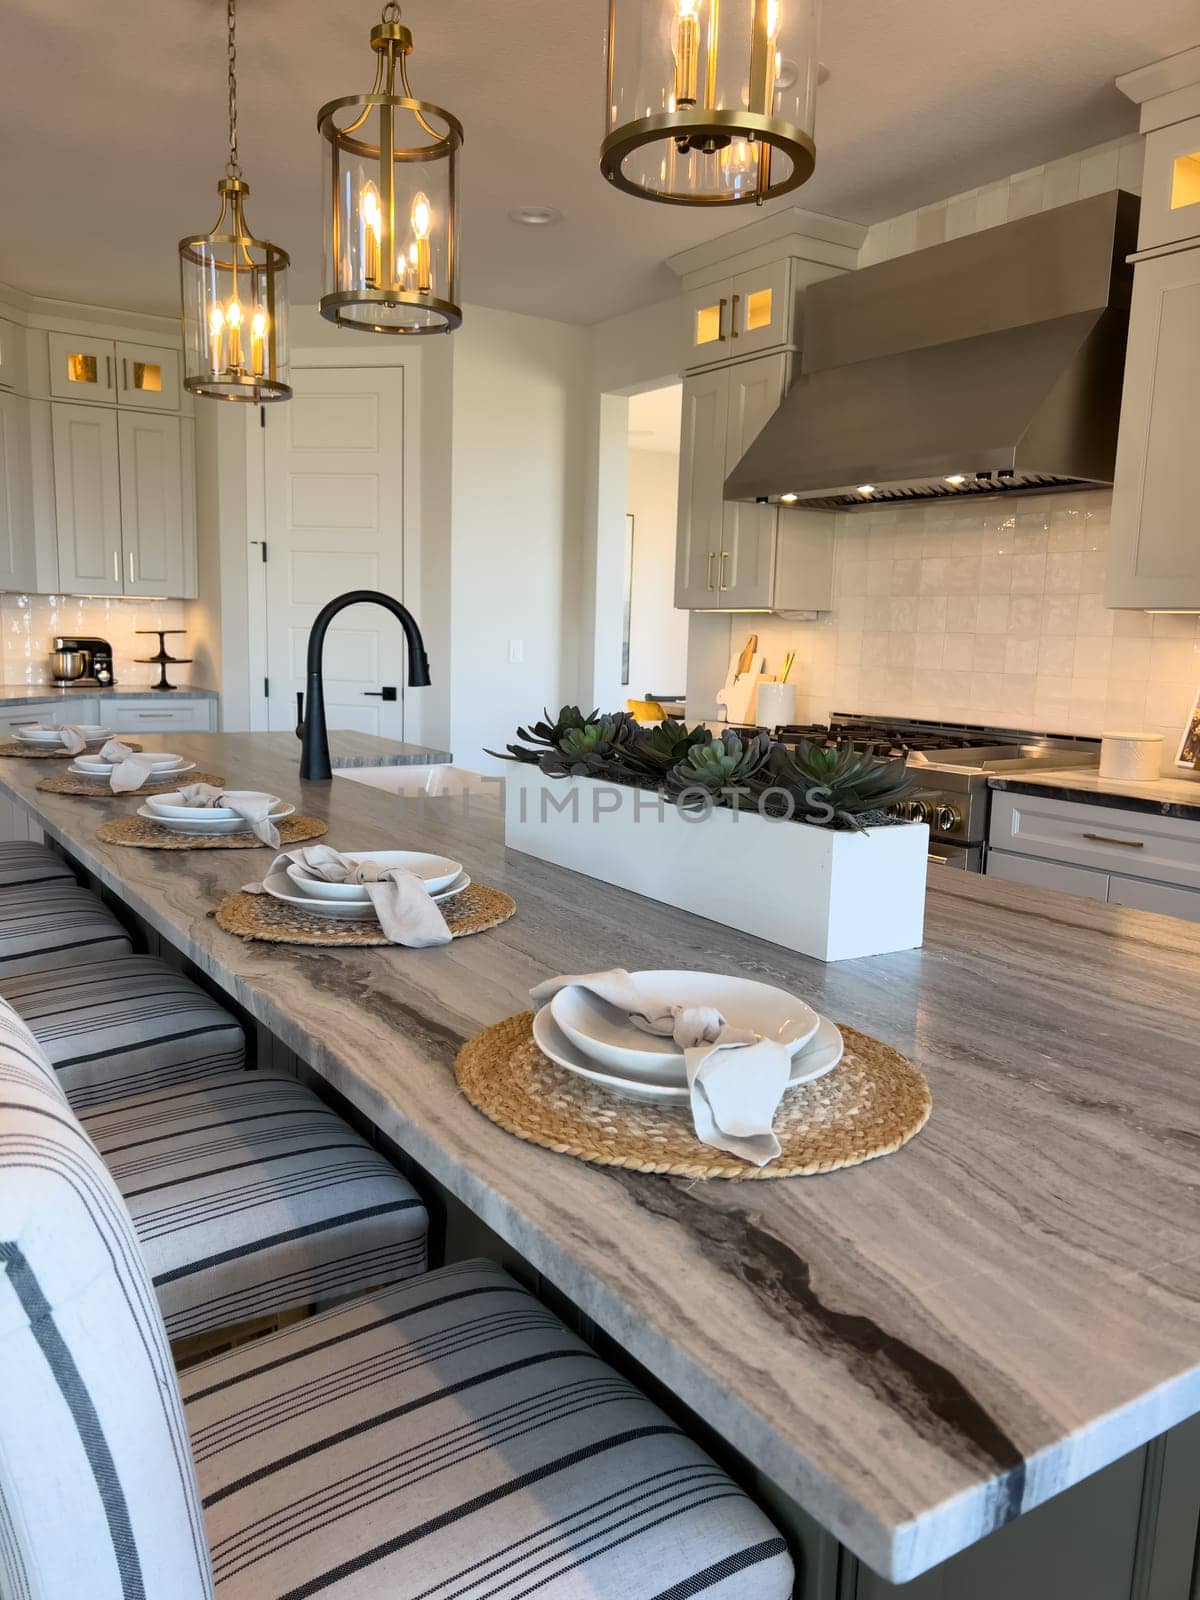 Coastal Elegance Meets Functionality in Spacious Kitchen and Dining Area by arinahabich